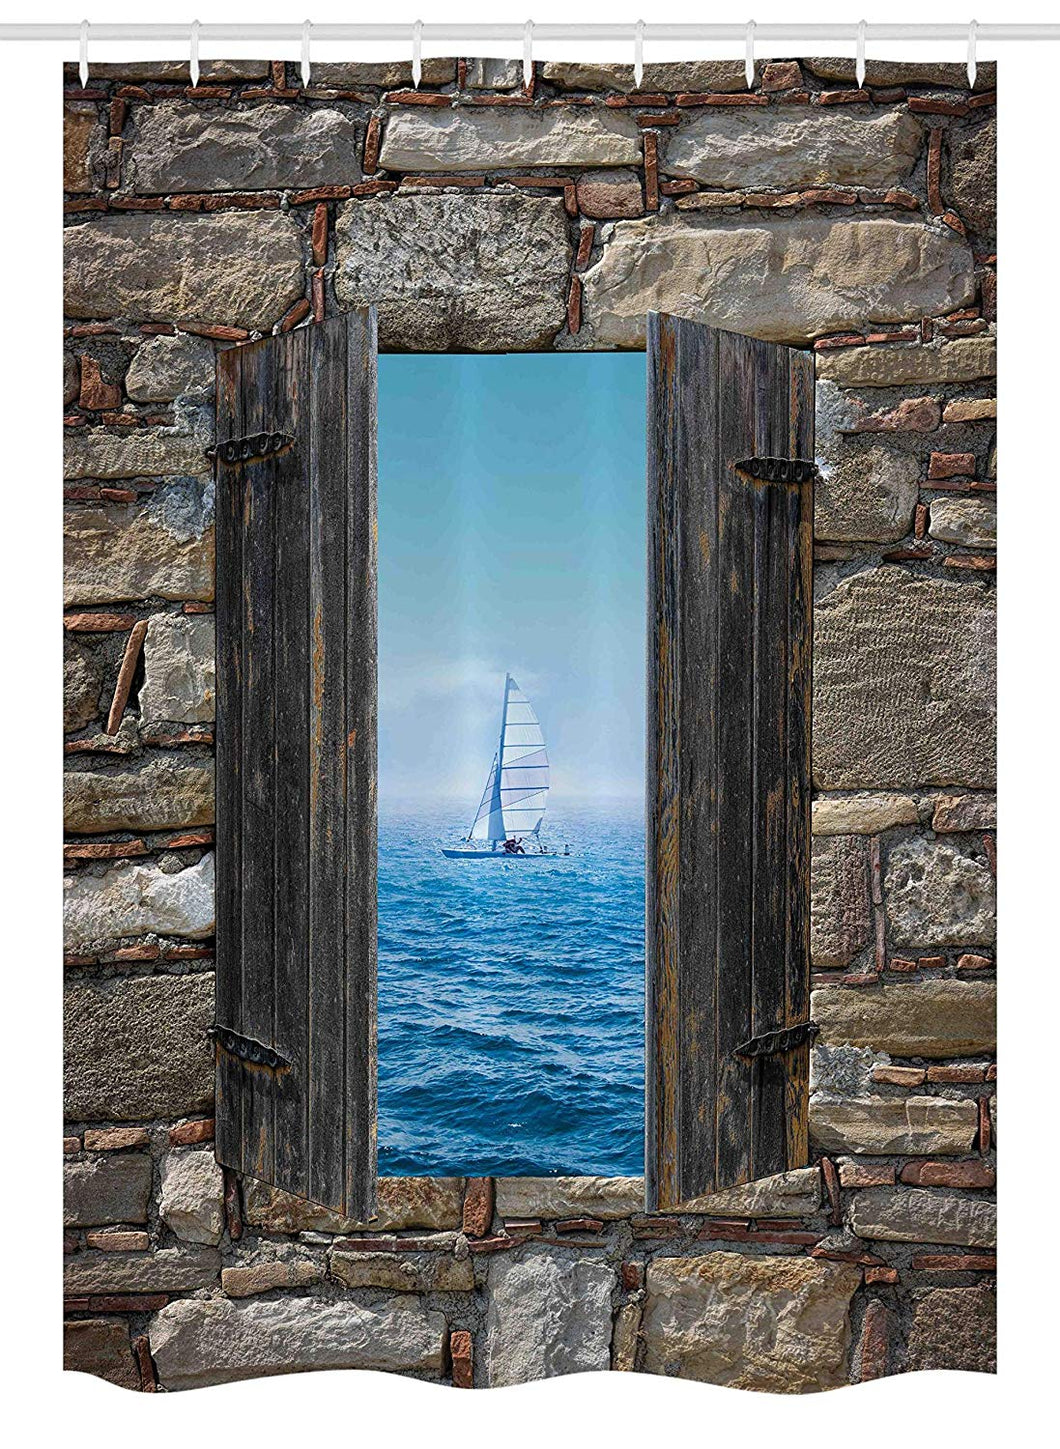 Ambesonne Nautical Stall Shower Curtain, Image of a Sailing Boat from Stone Window Narrow Perspective Idyllic Mediterranean, Fabric Bathroom Decor Set with Hooks, 54